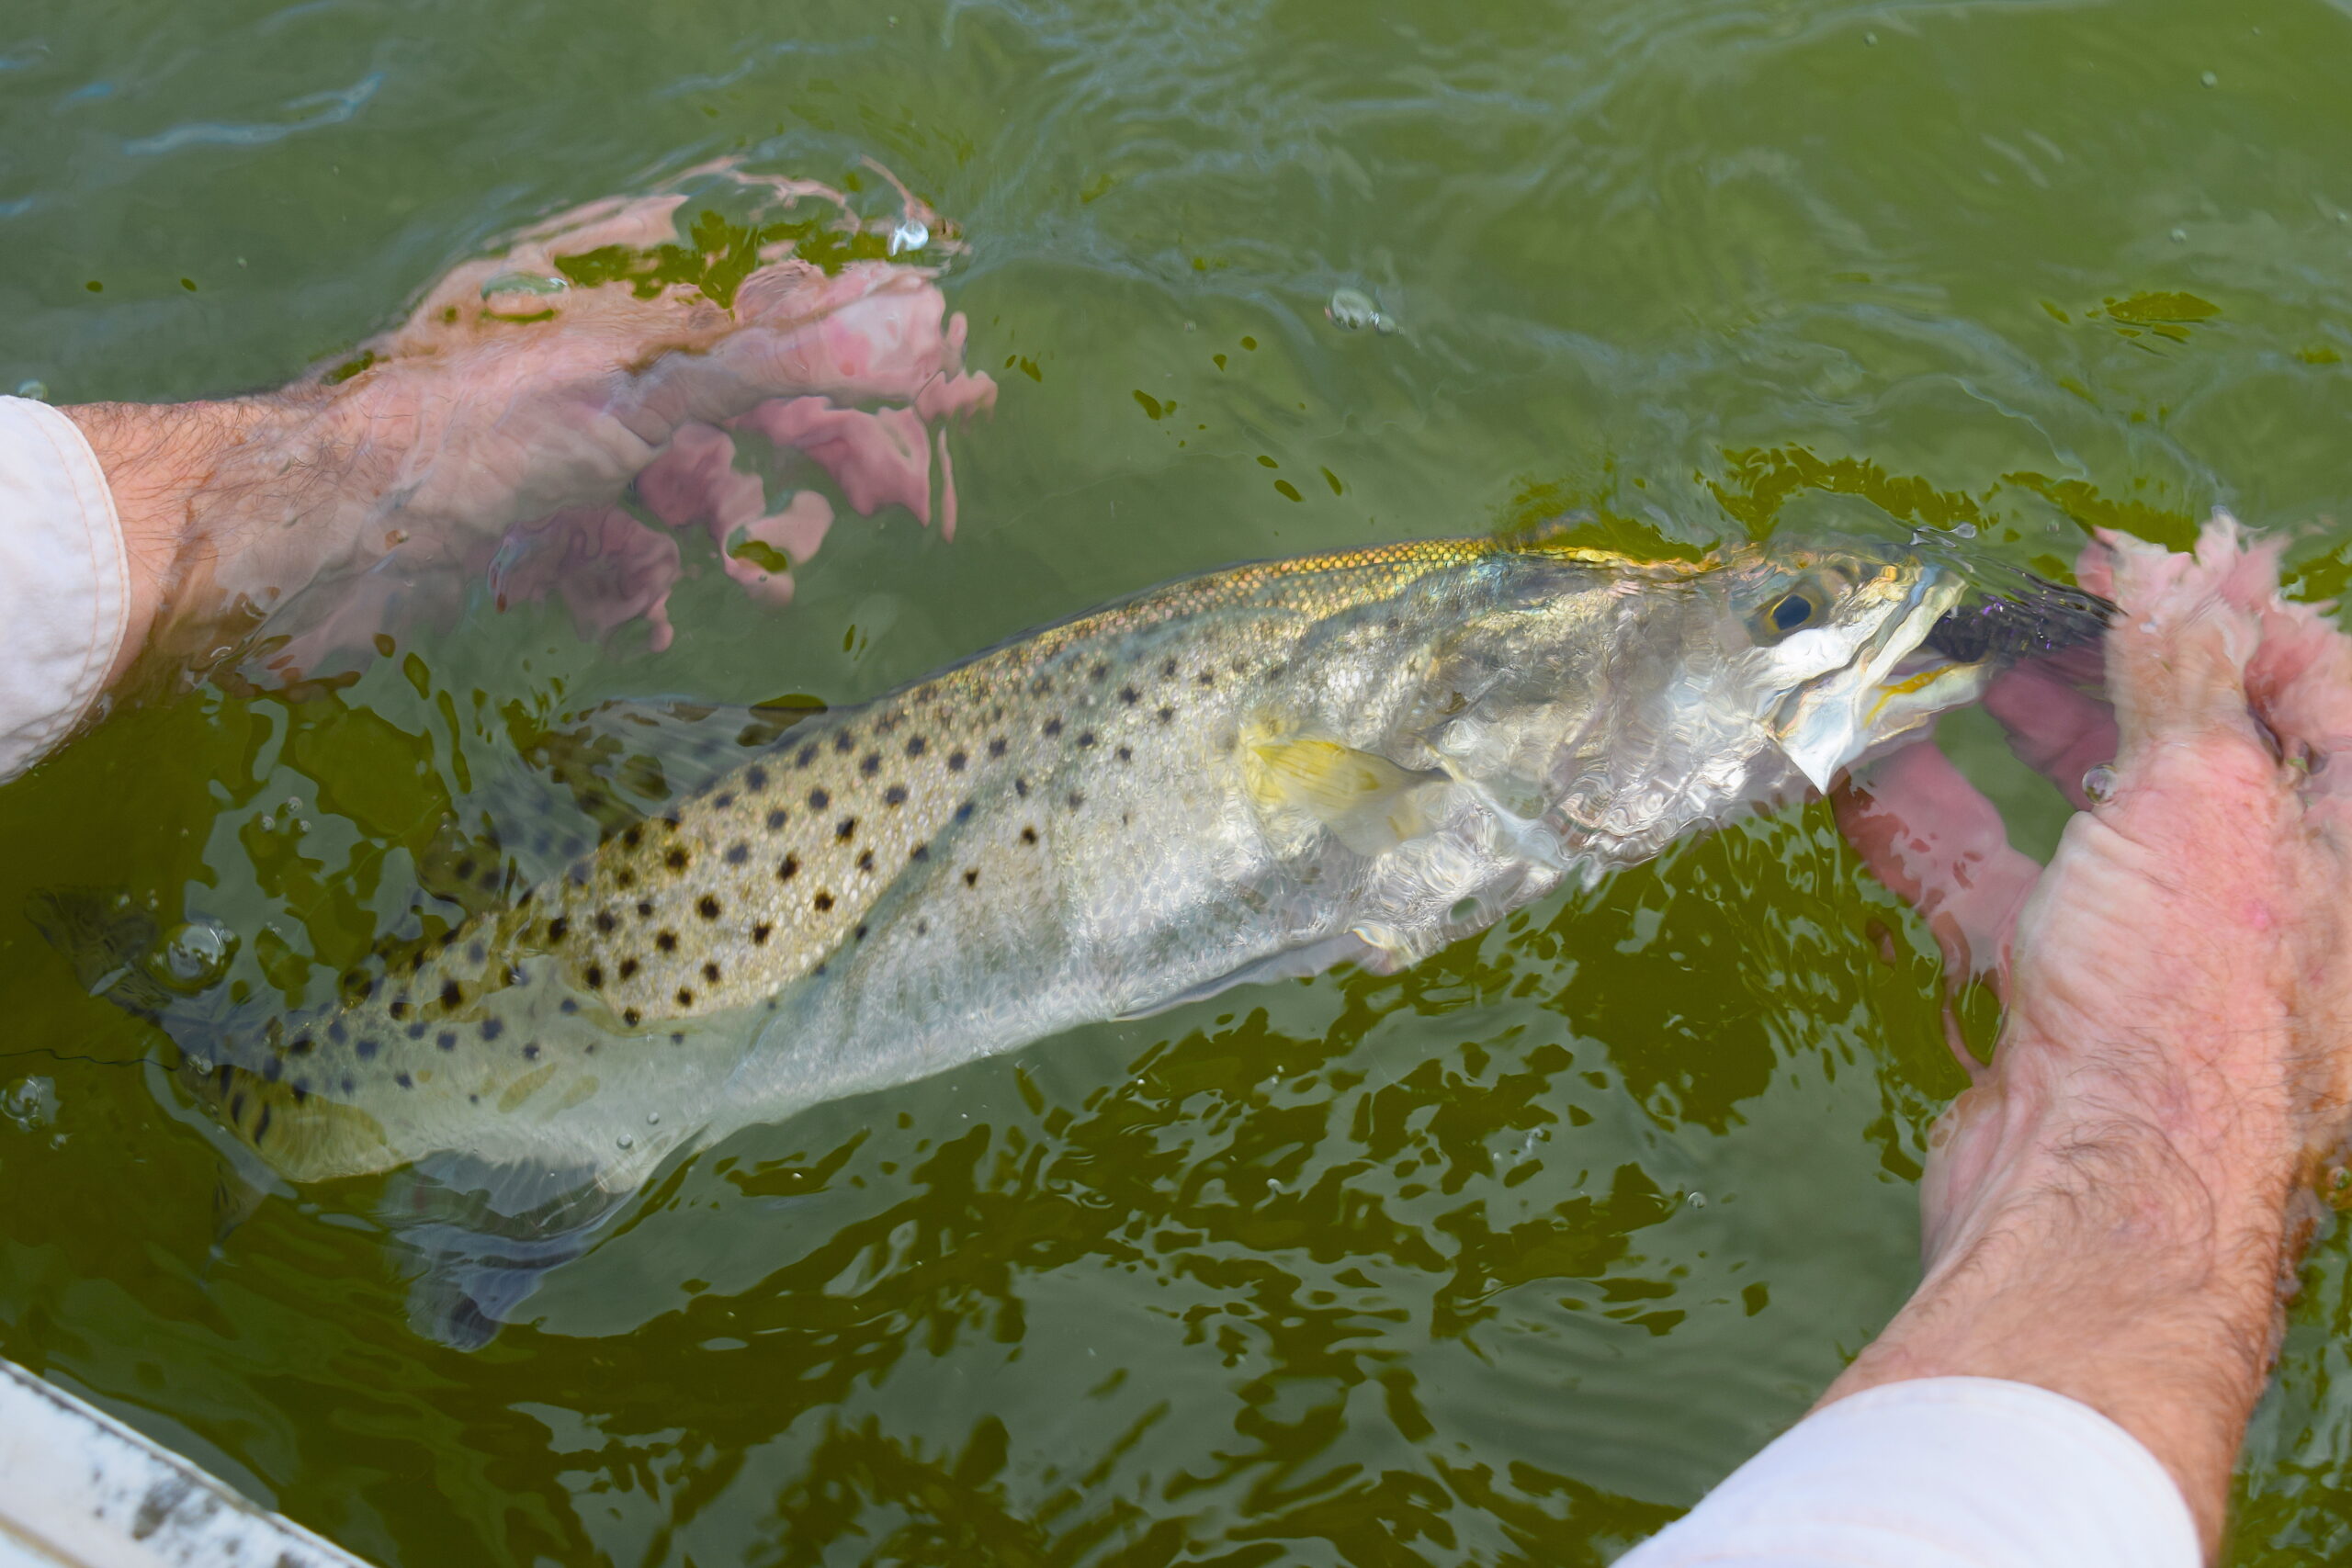 Do Self-Releasing Hooks Minimize Fish Injuries During Catch-and